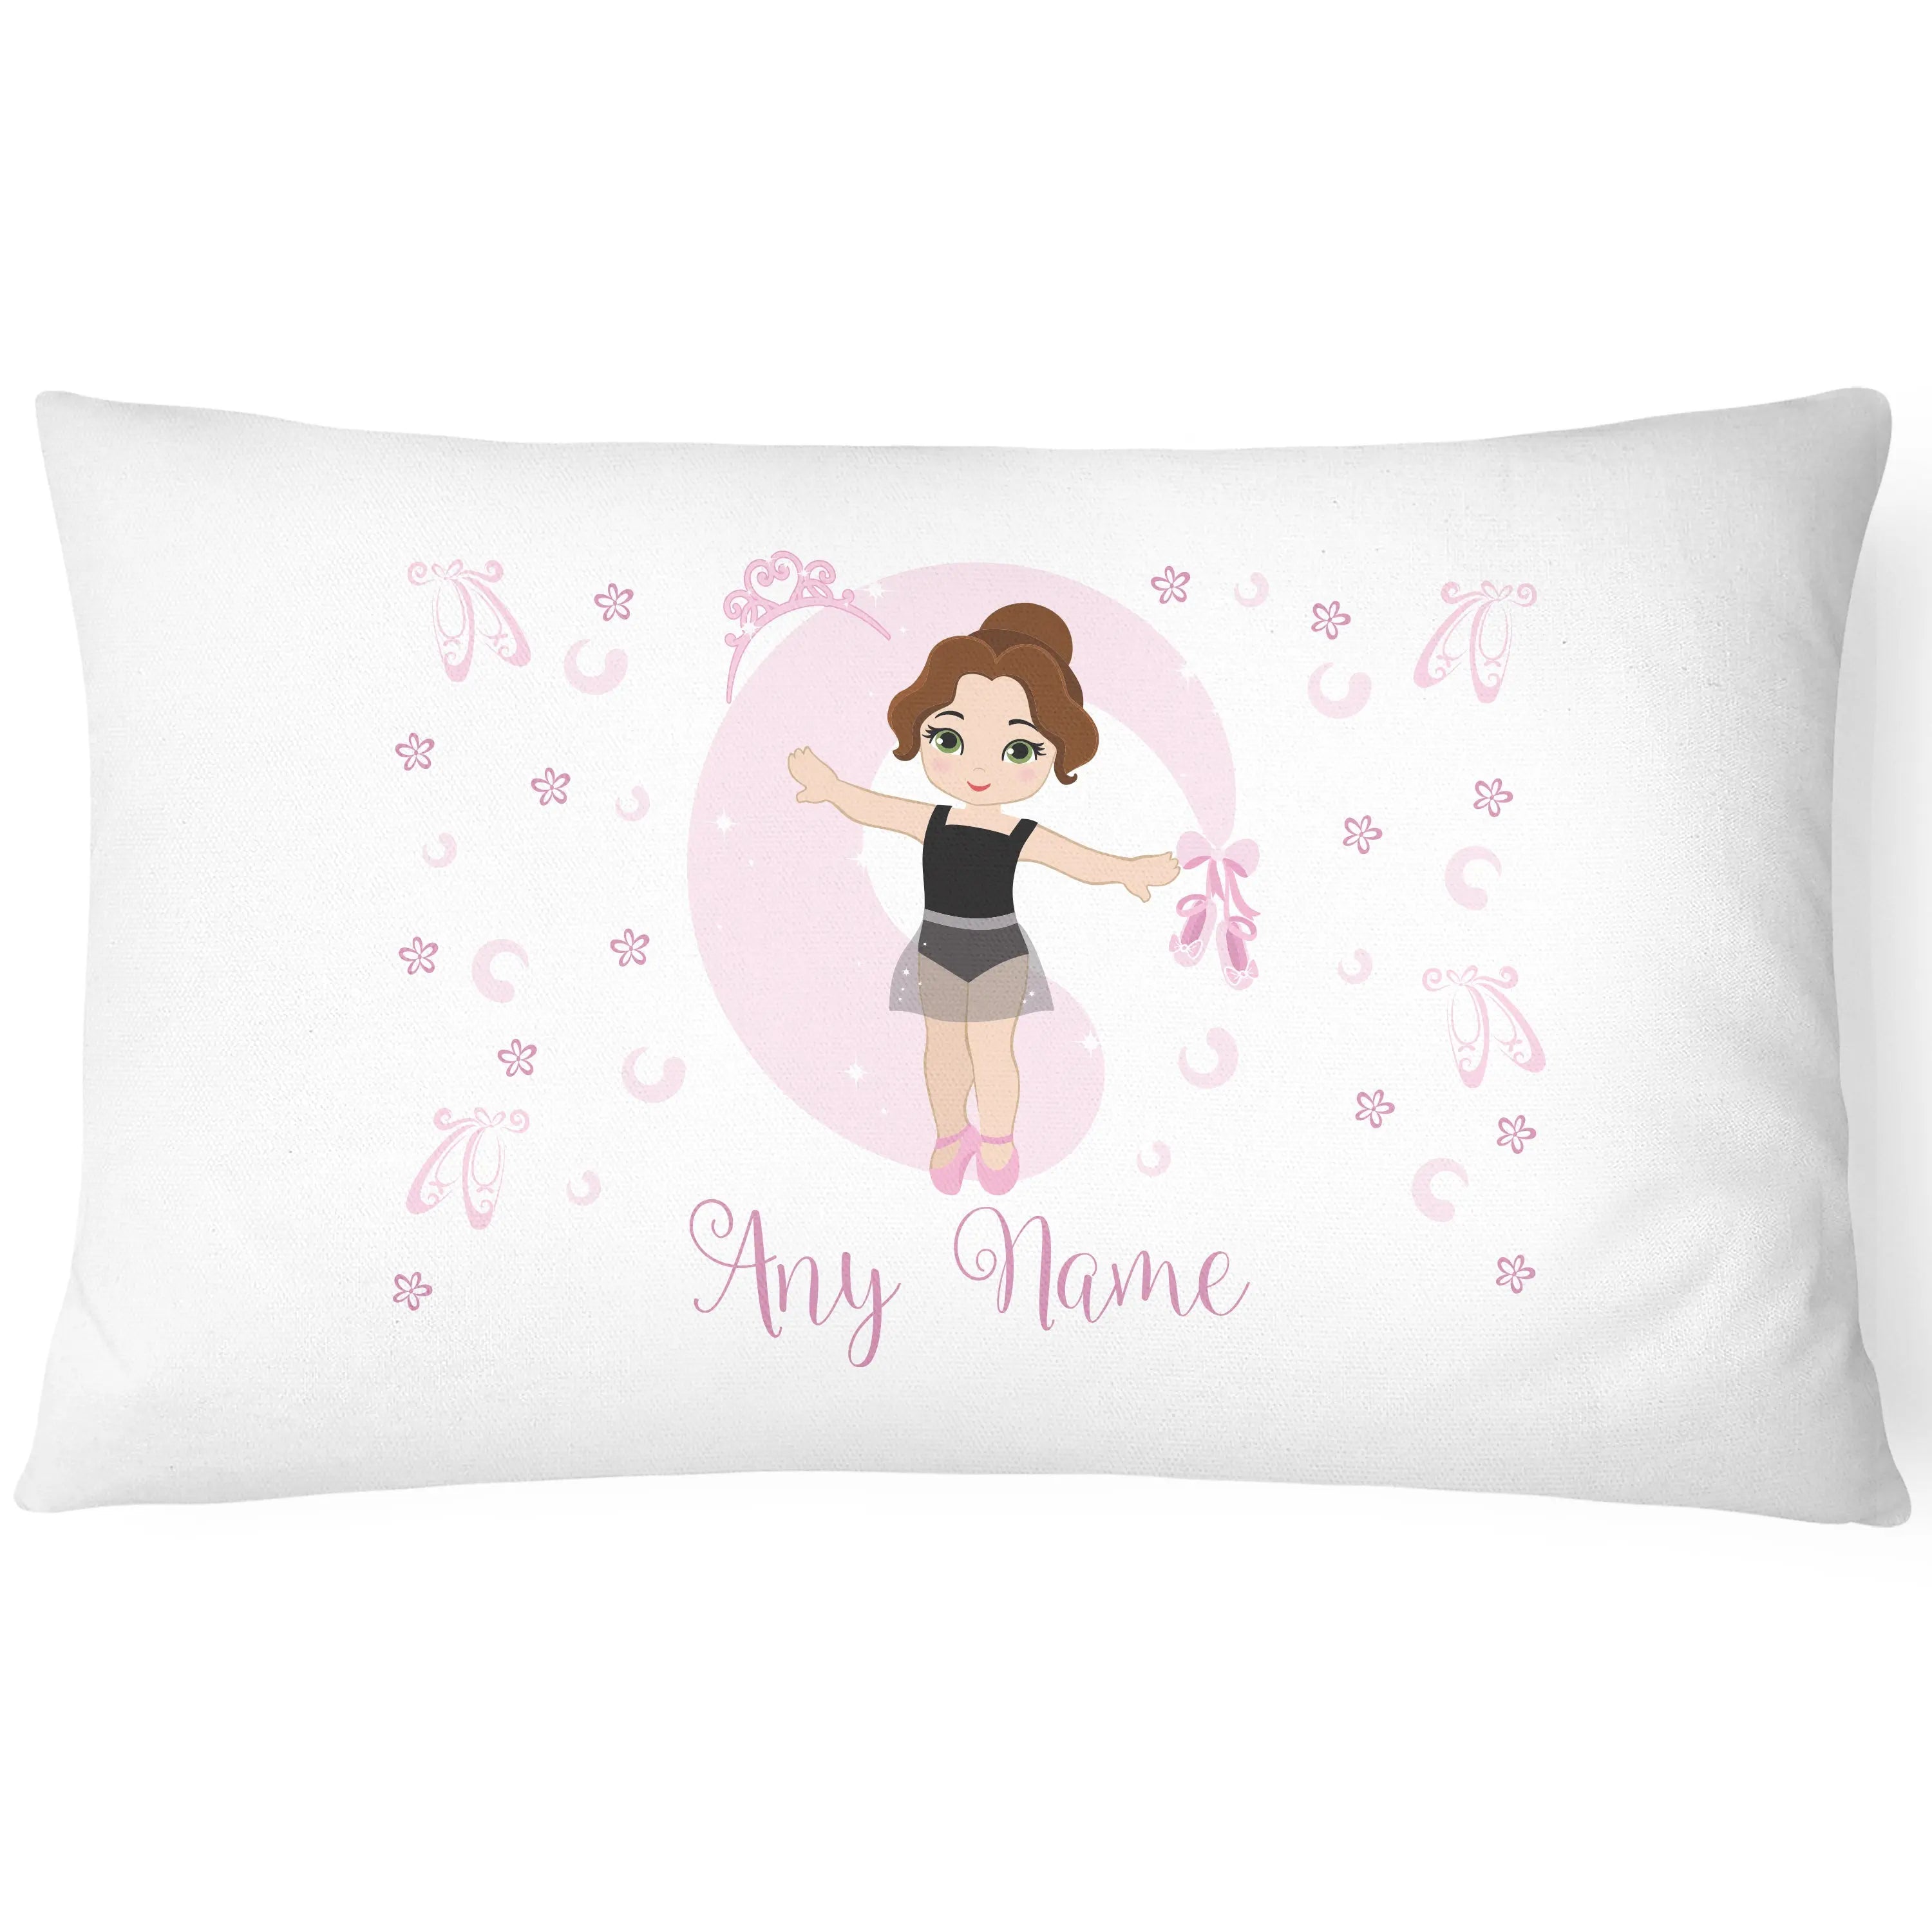 Ballerina Children's Pillowcase - Personalise with Any Name - Dancer - CushionPop